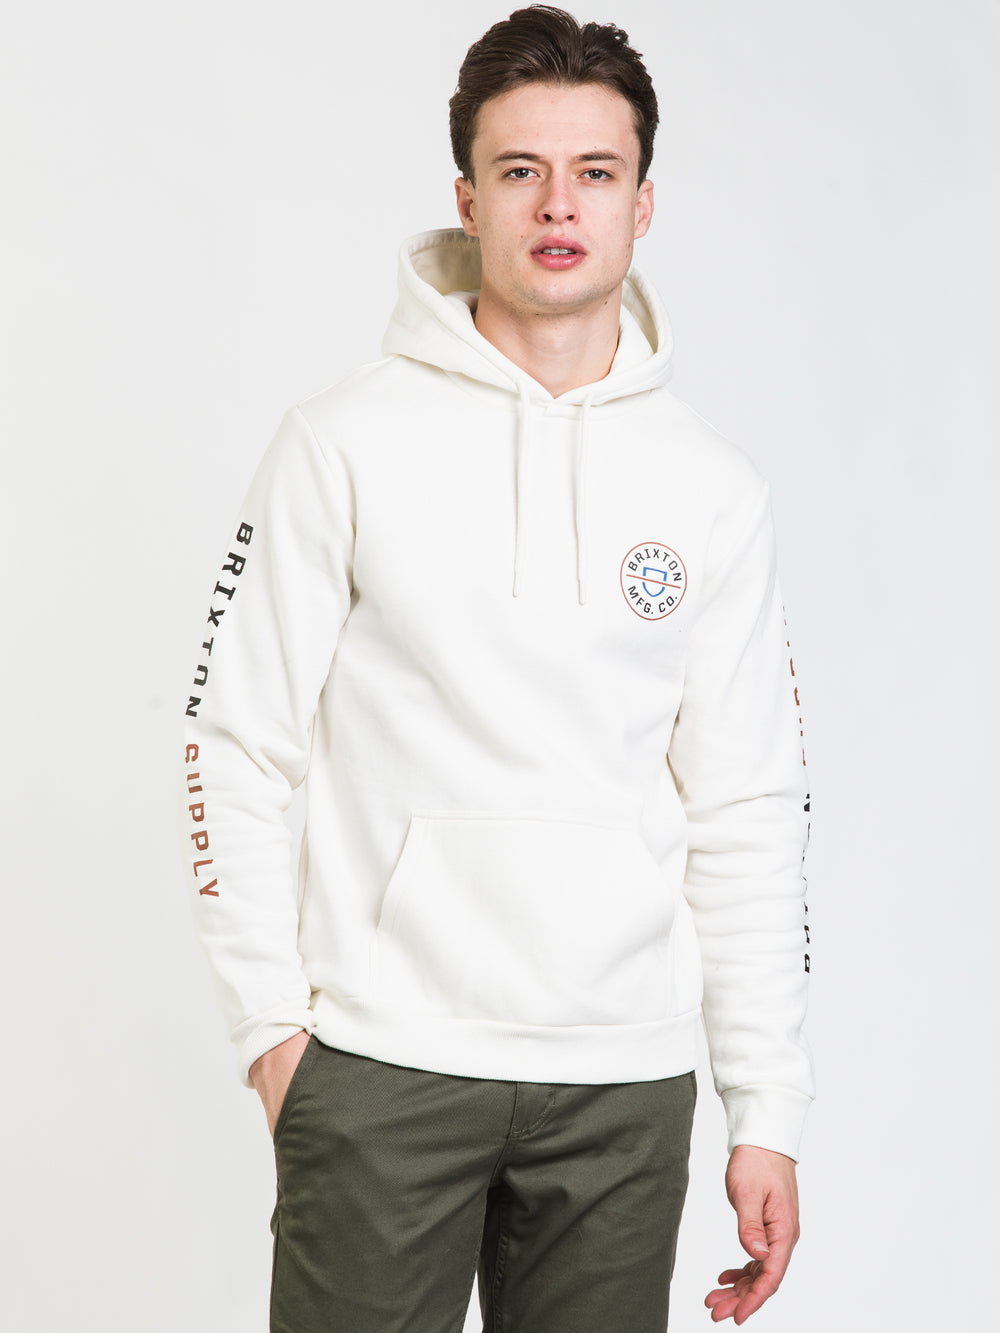 BRIXTON CREST PULLOVER HOODIE - CLEARANCE